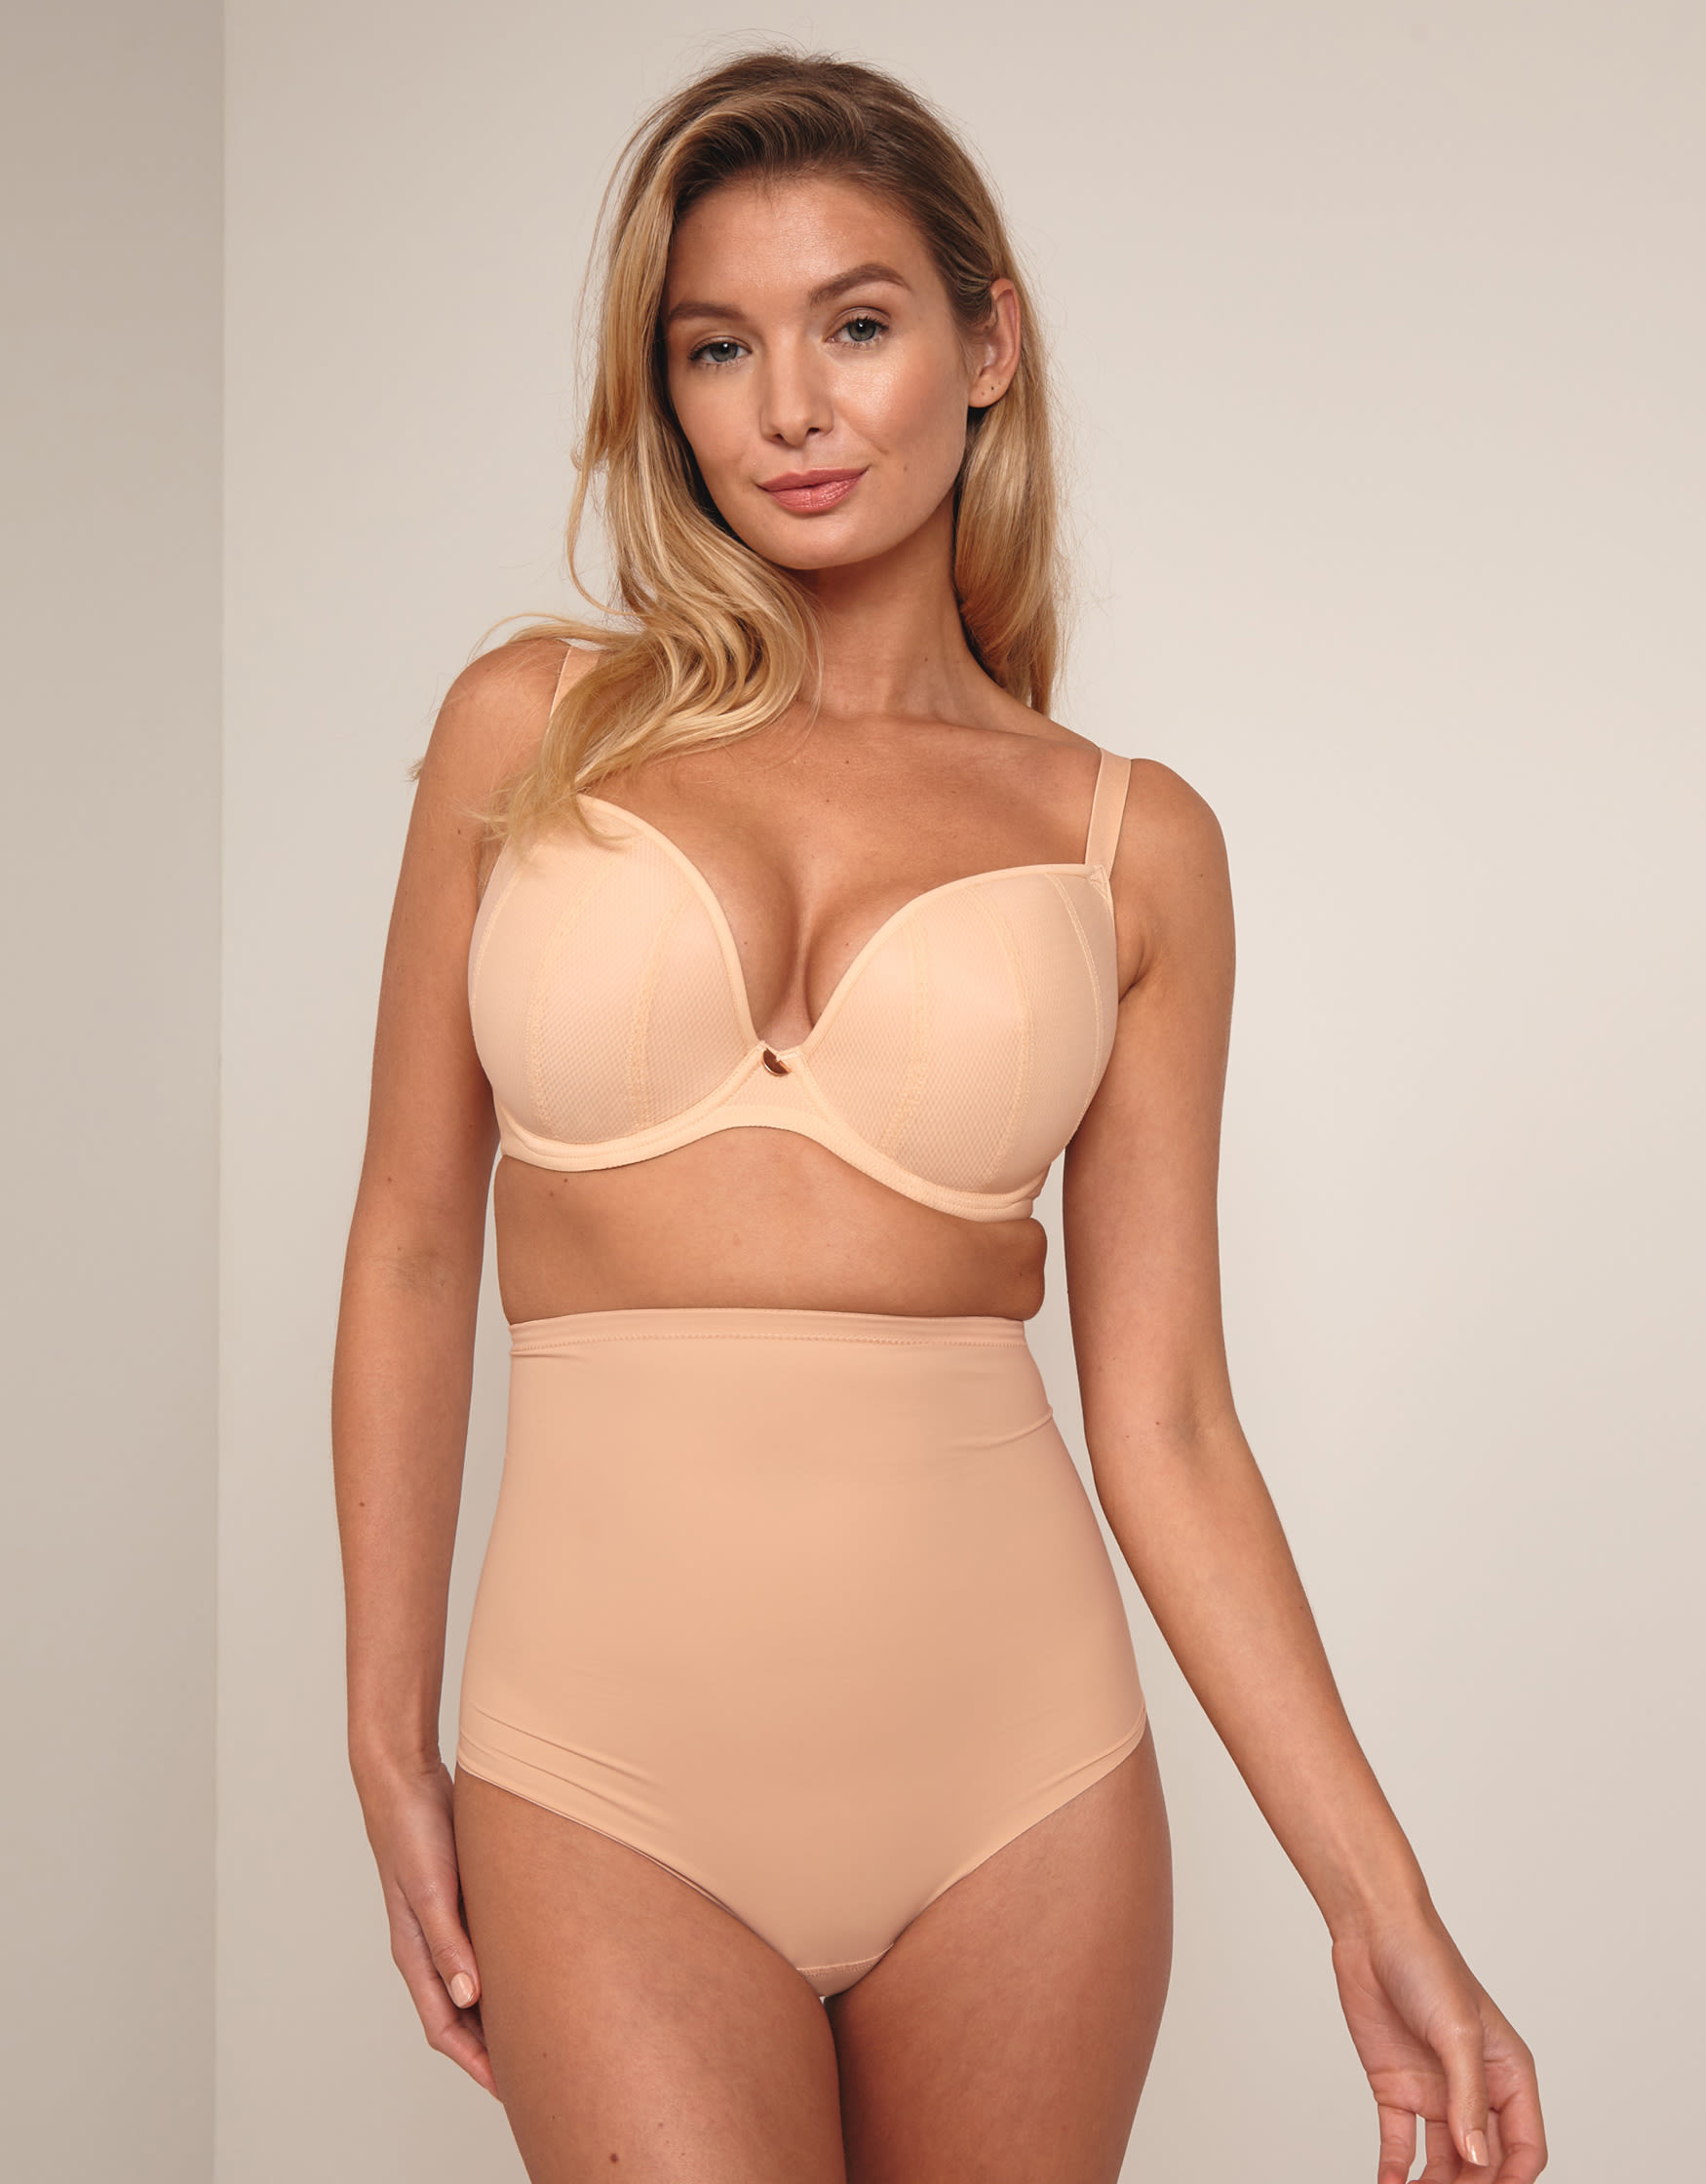 Shapewear Buying Guide - Helpful Hints on Choosing & Caring for